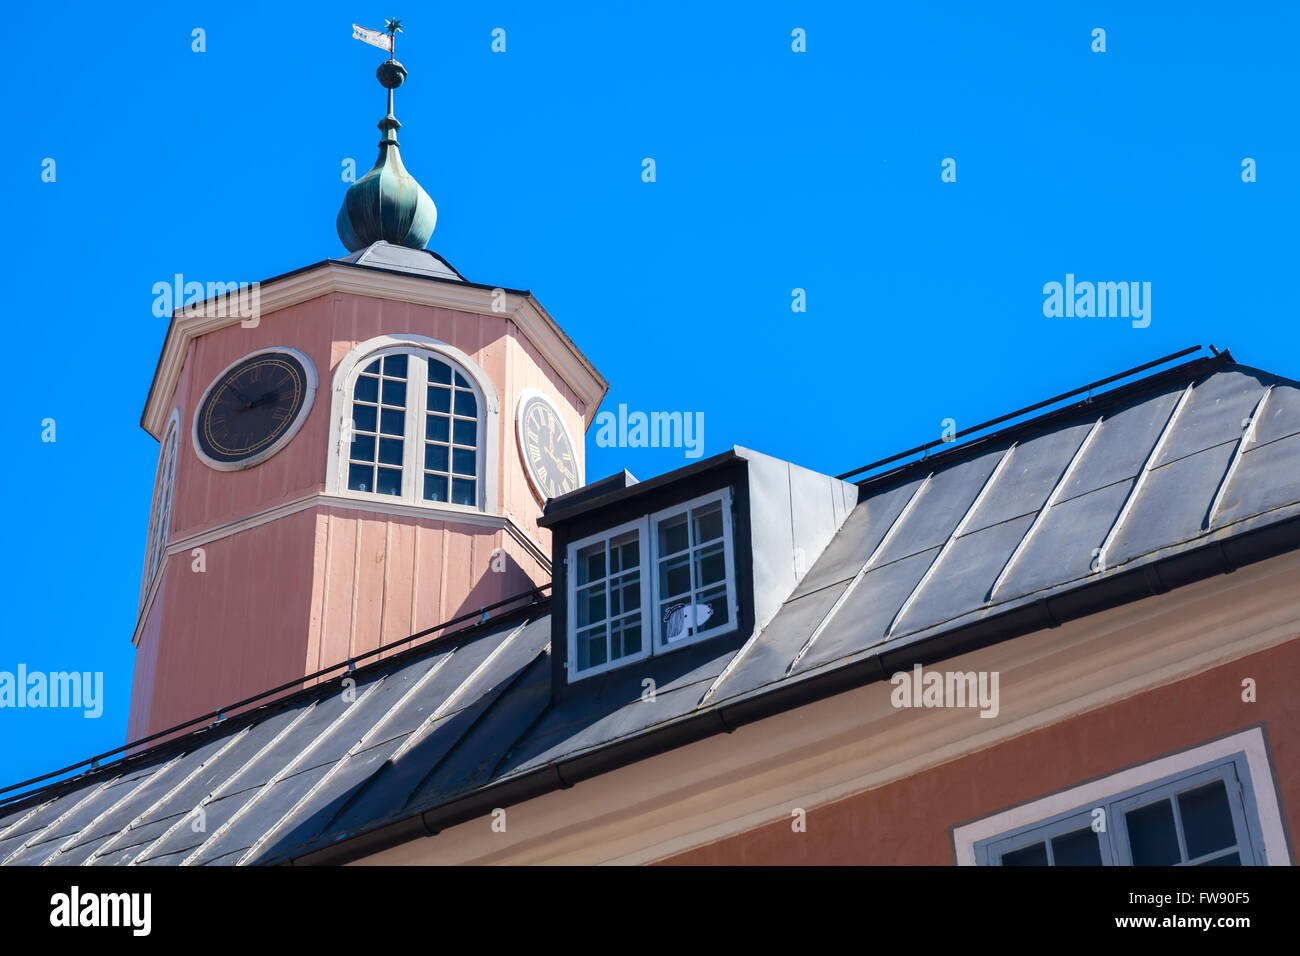 Porvoo, Finland - June 12, 2015: Small tower on the roof of town hall building Stock Photo